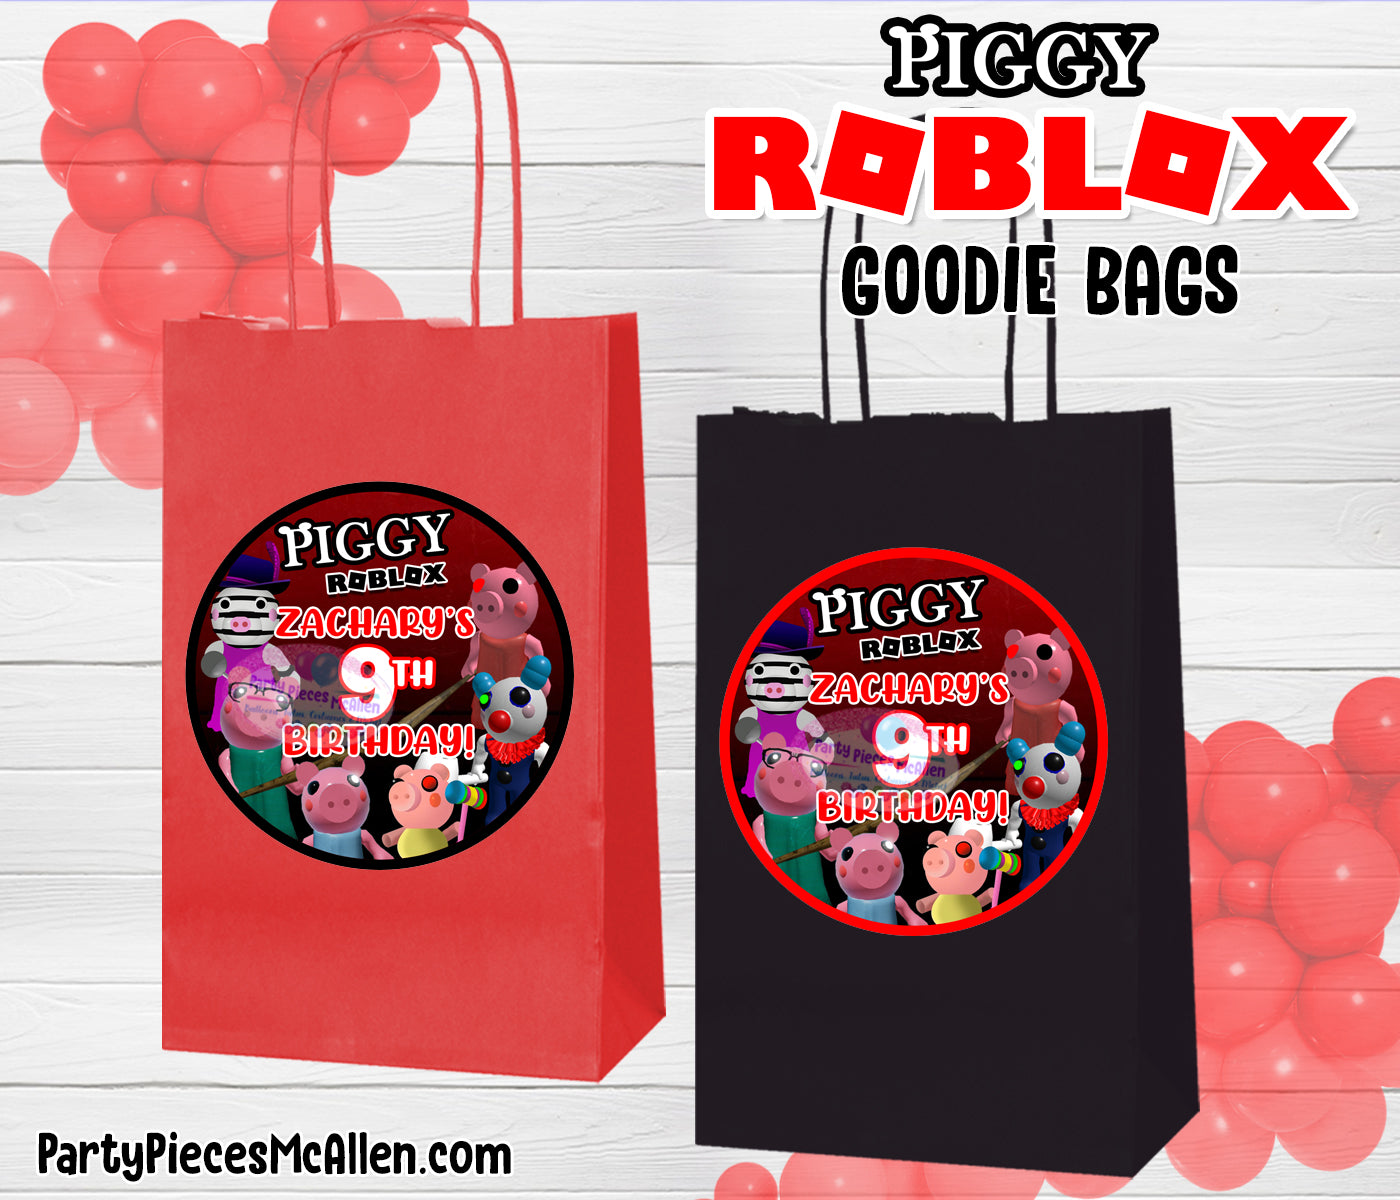 Personalized Goodie Bags Singapore | Personalised Party Favors